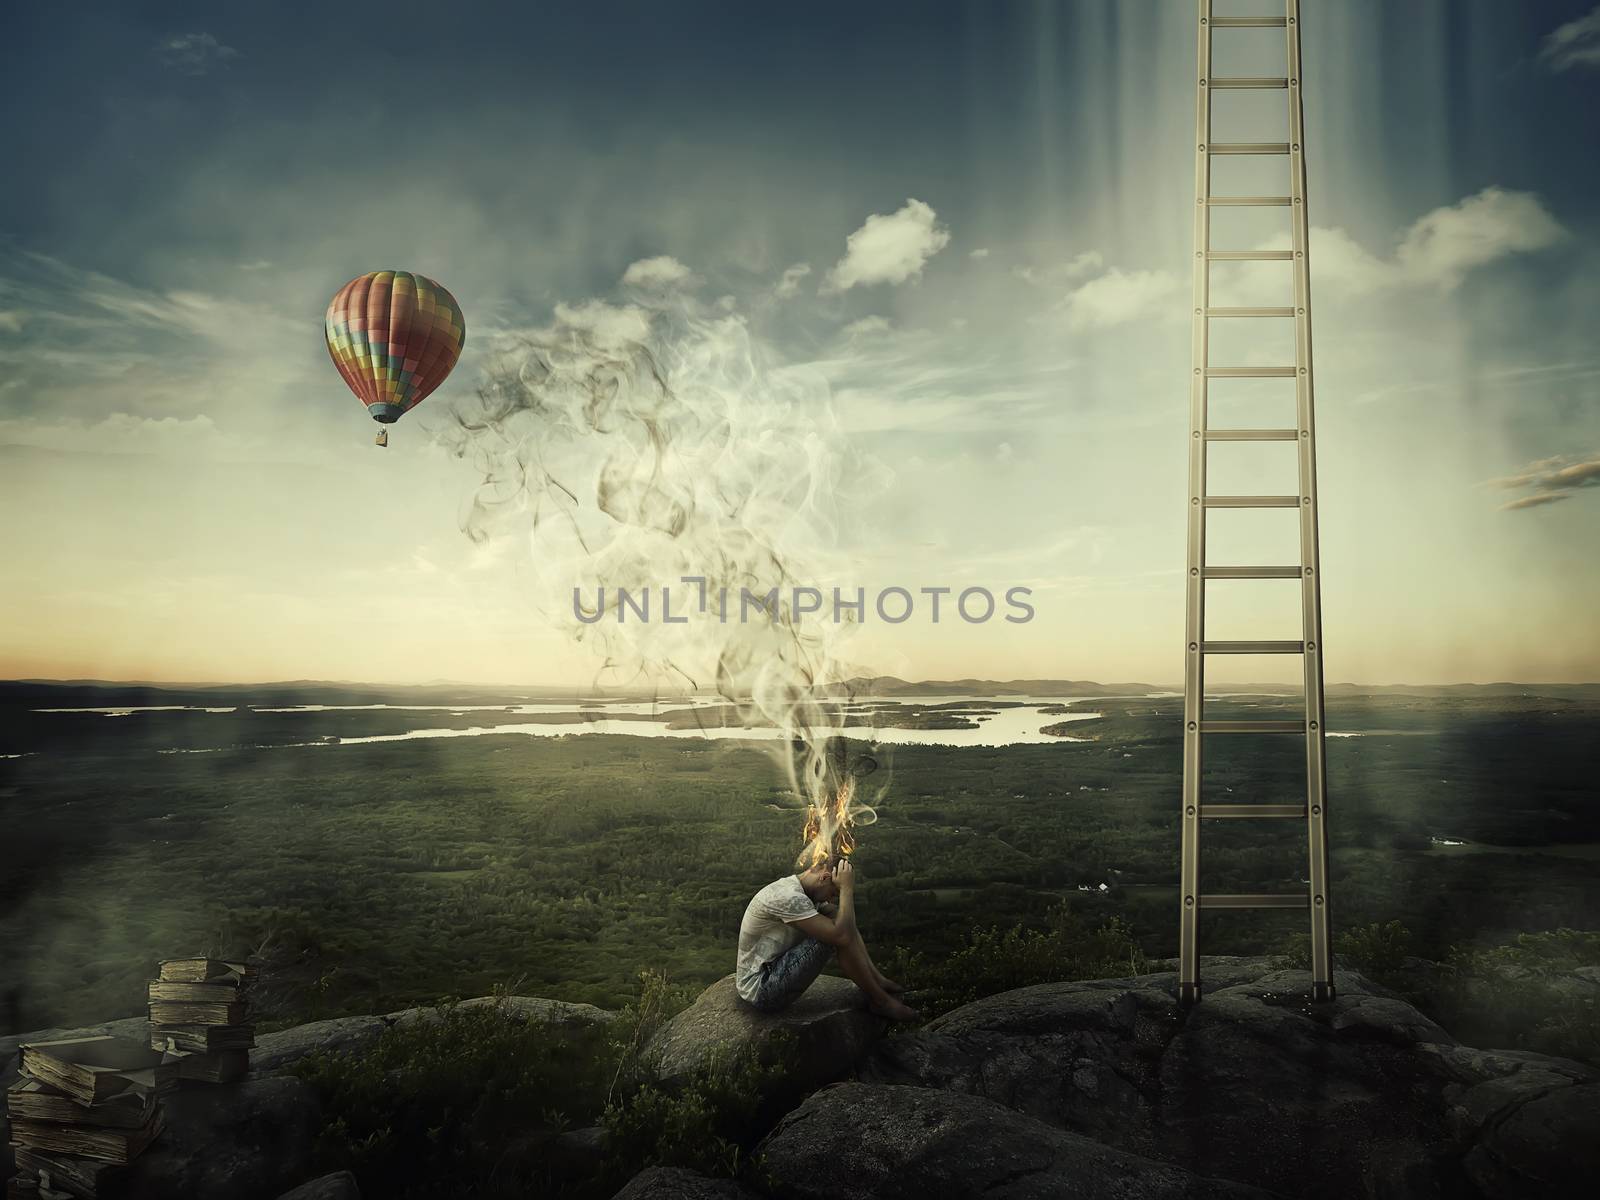 Young boy sit on the top of a hill near a ladder goind up in the sky and a hot air balloon fly over the forest valley. Bad mood, hard thinking, no inspiration concept with his head fired and the smoke rising up.